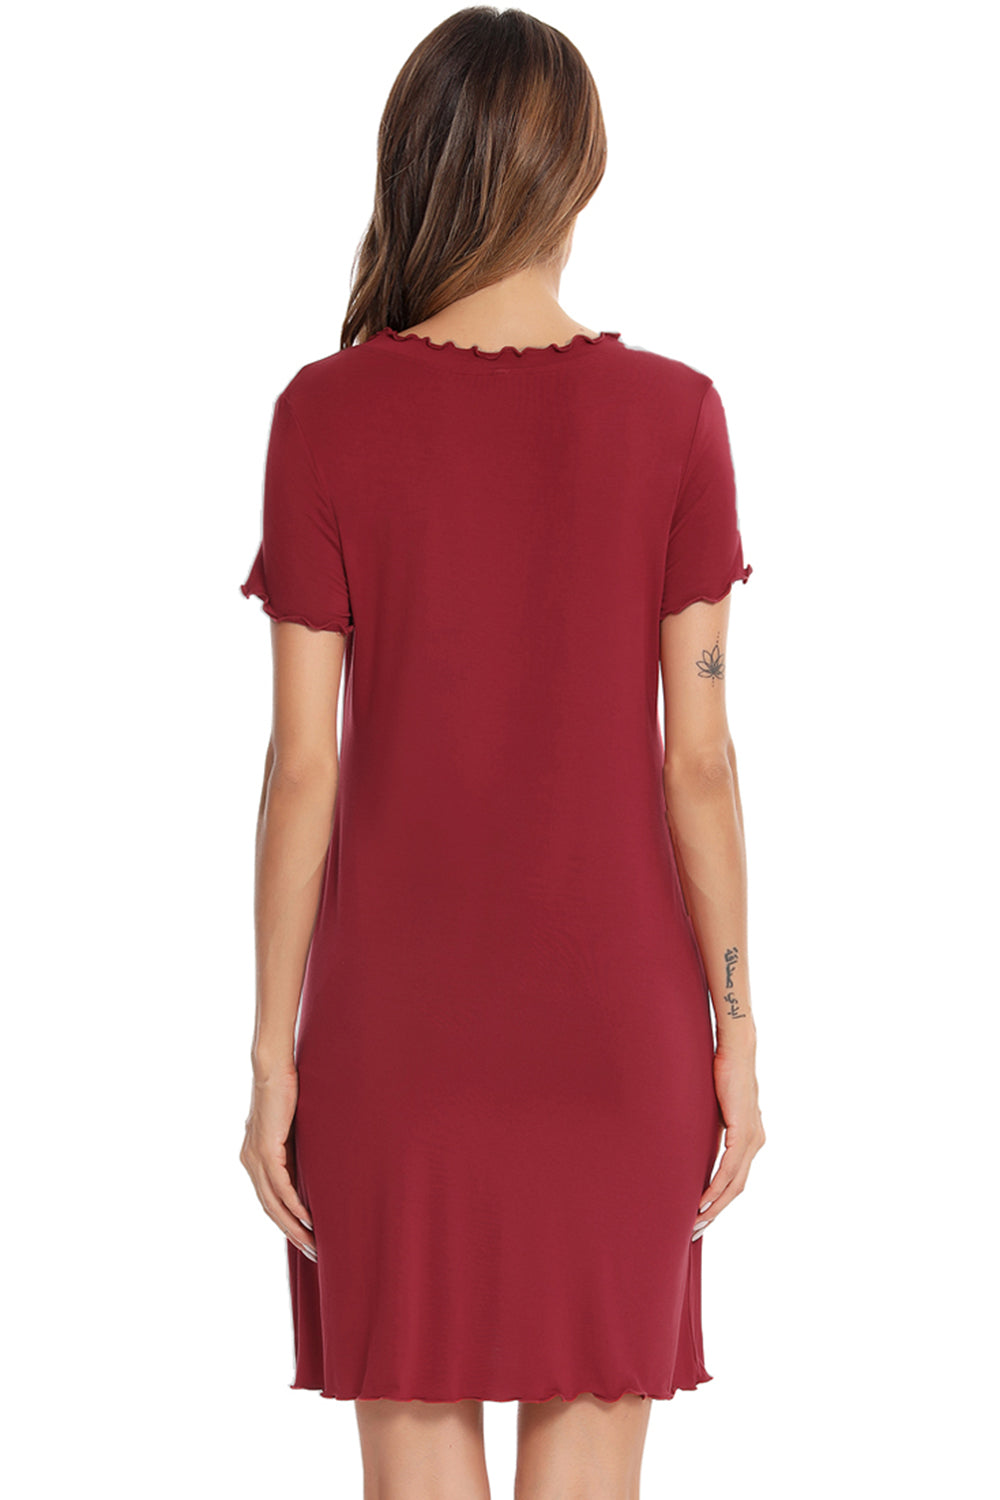 Chic Round Neck Lounge Dress in red, black, navy. Perfect blend of style & comfort for home or casual outings. Effortless elegance in every wear.